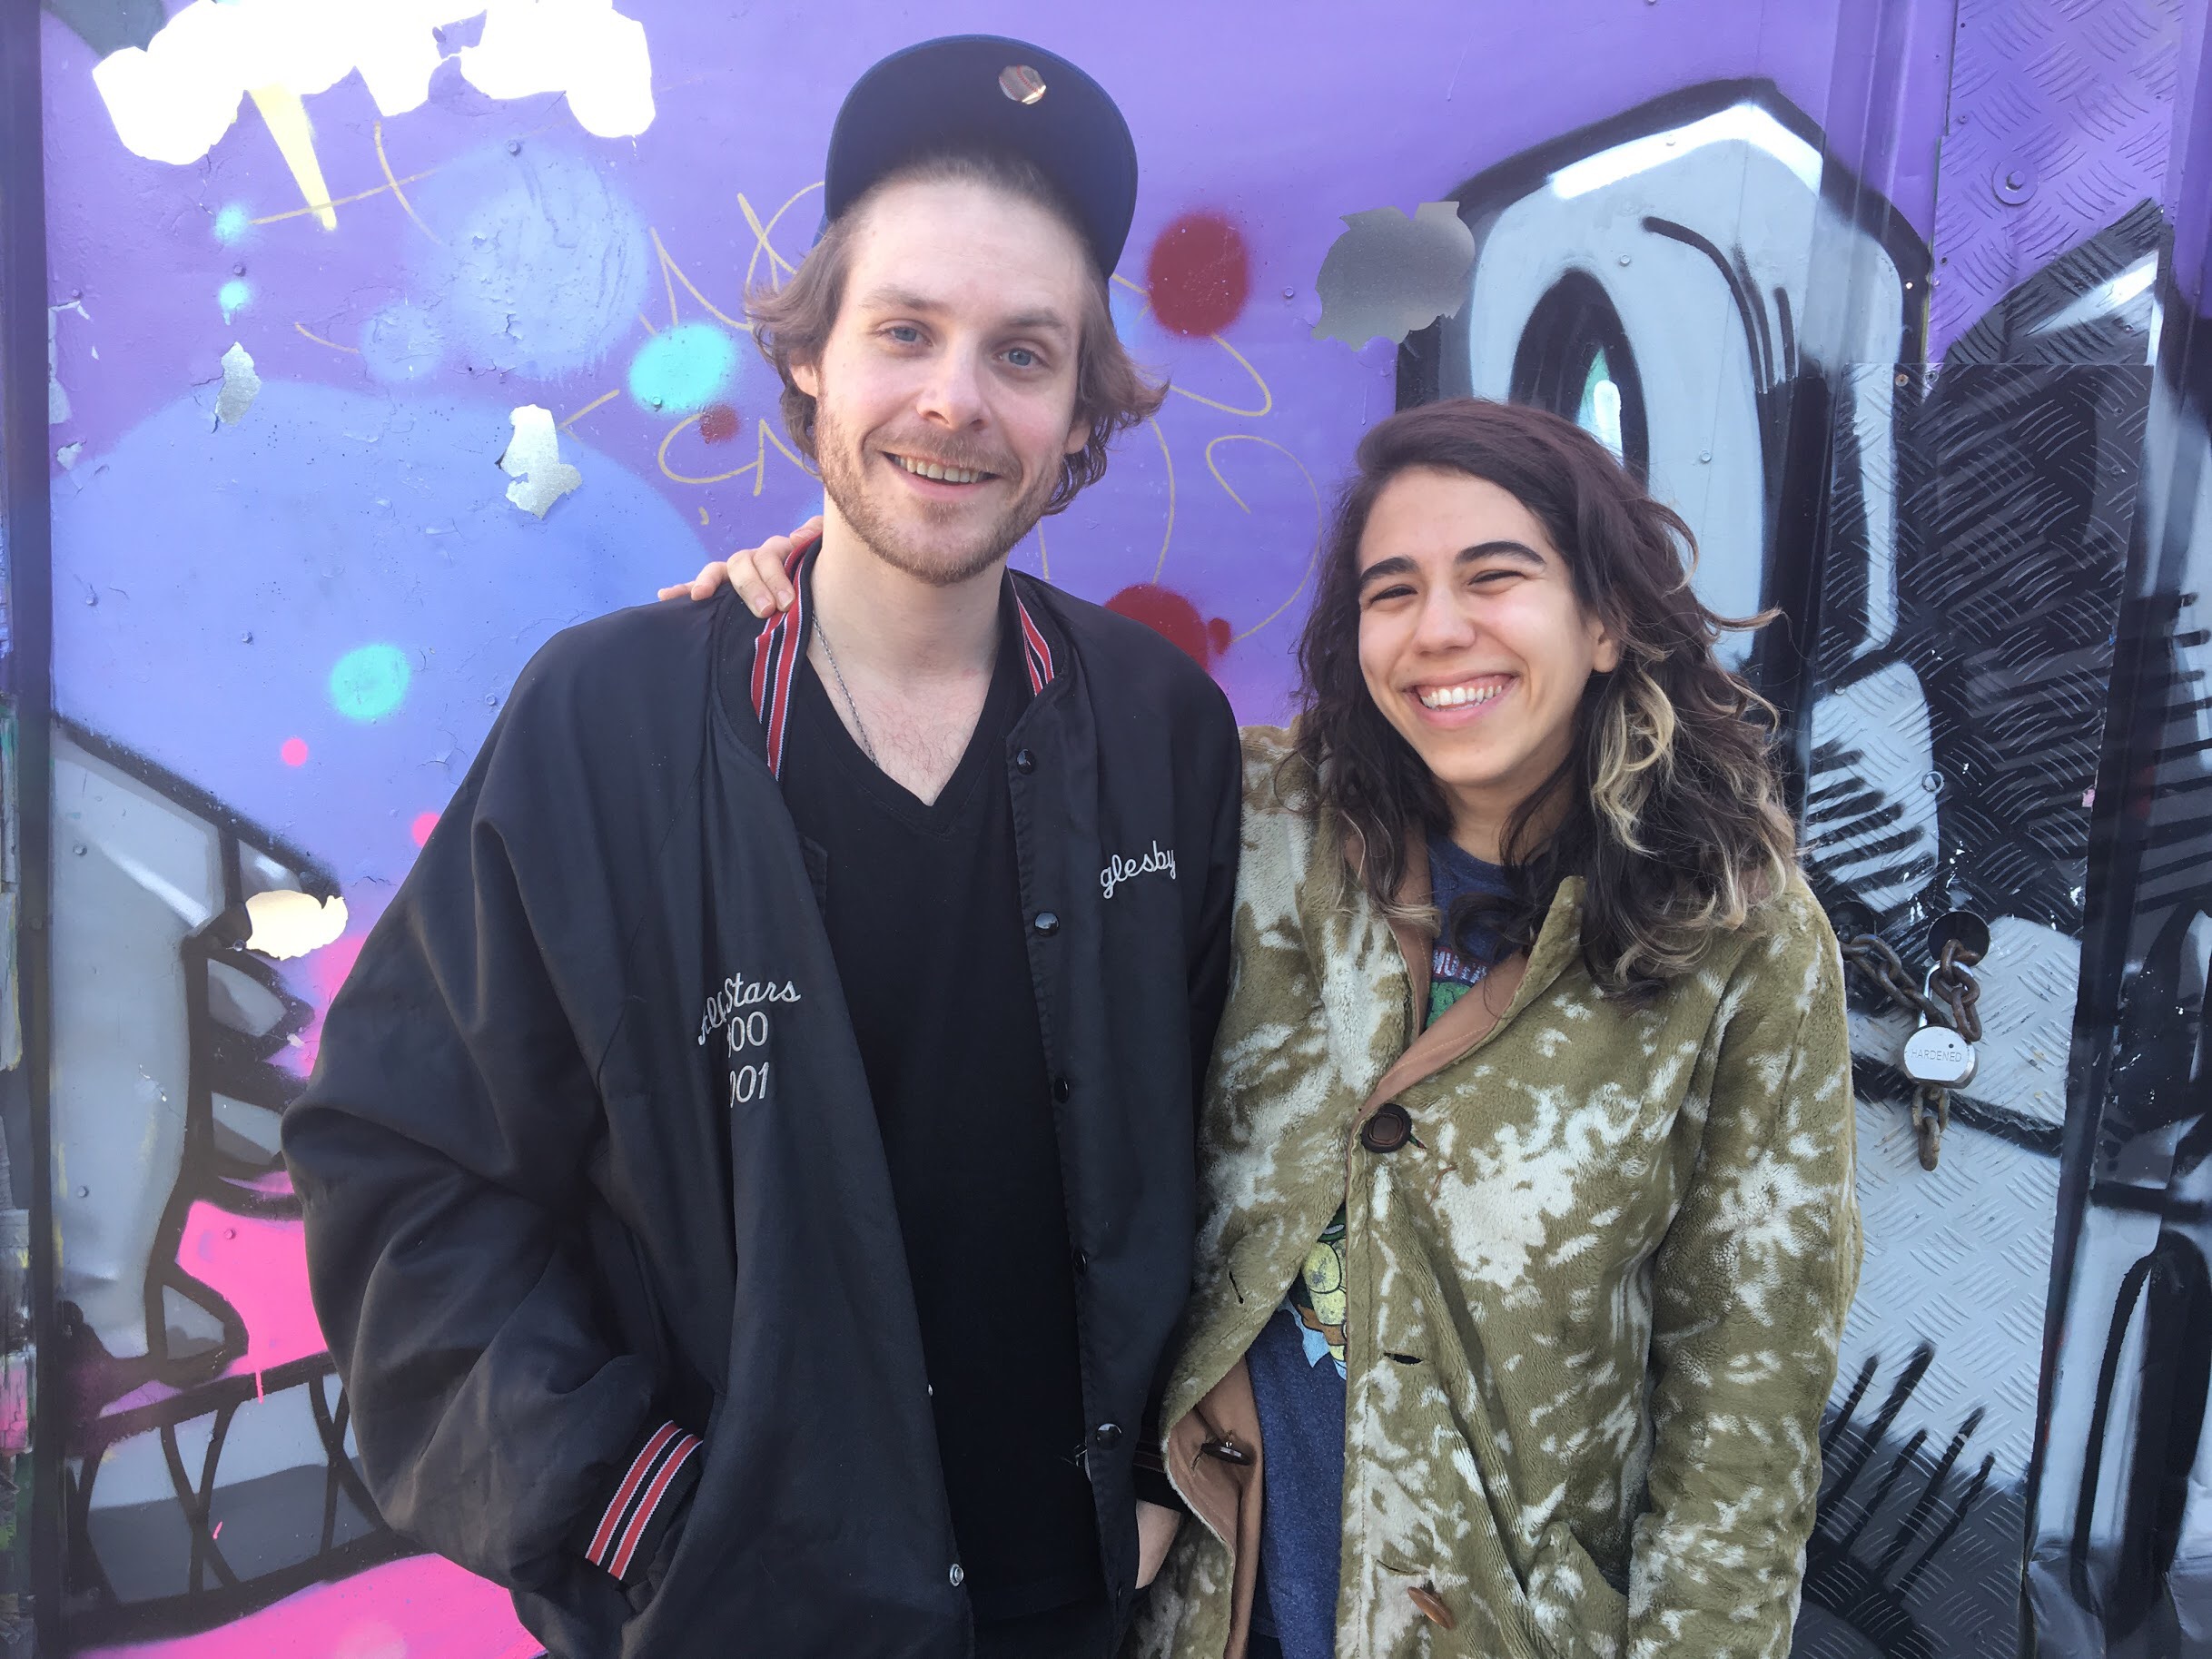 Sir Kn8 and Hila posing after the interview | Killin H8